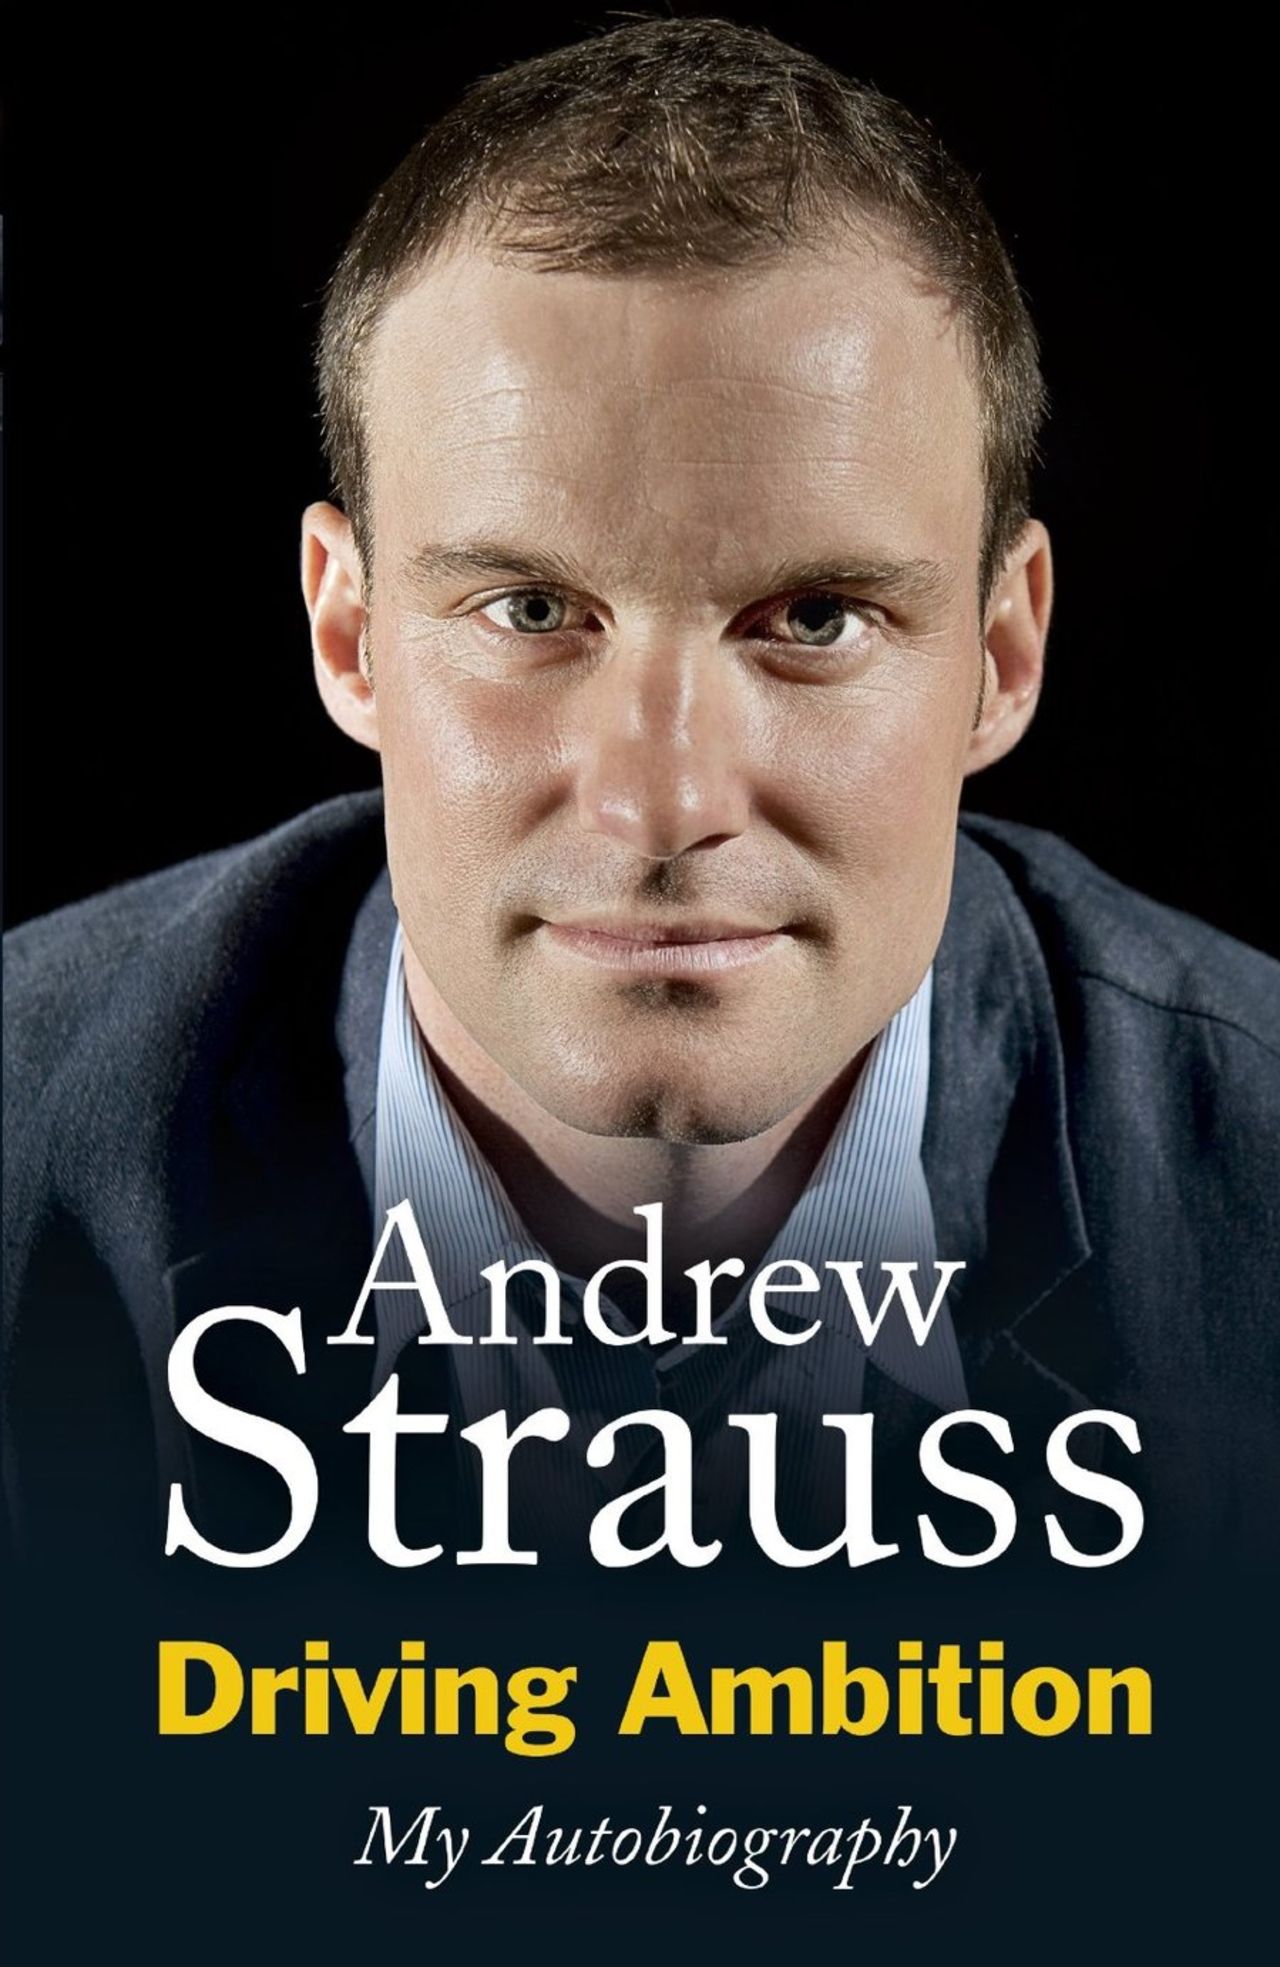 The cover of Andrew Strauss' autobiography <i>Driving Ambition</i>